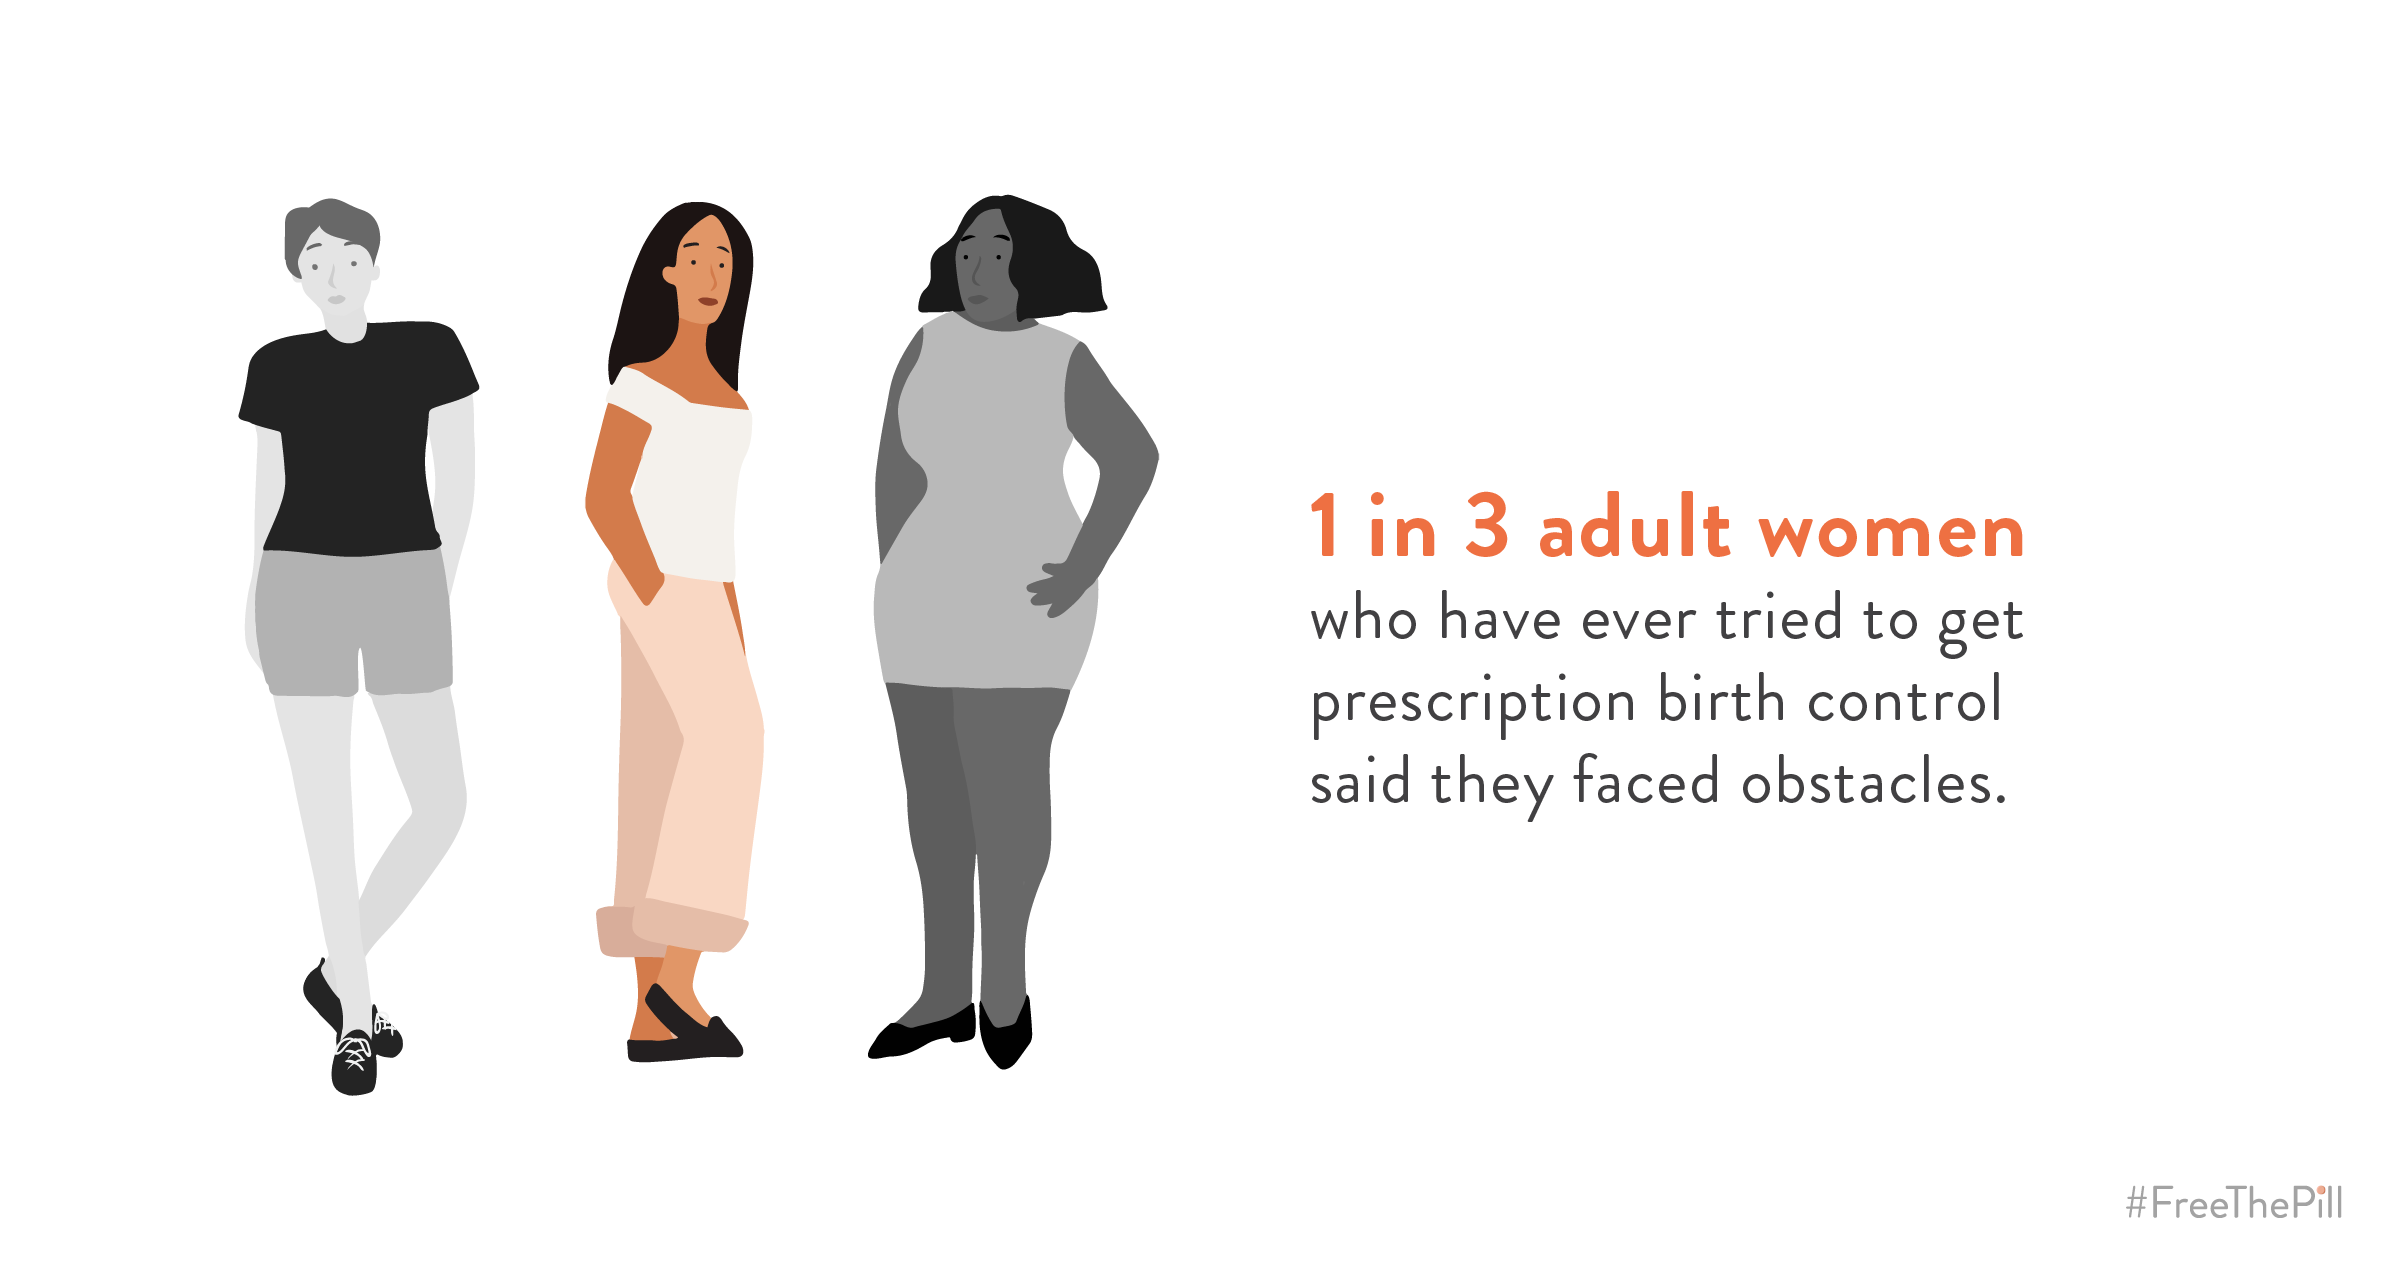 A graphic which shows three women, two in black and white and one in color and the text, "1 in 3 adult women who have ever tried to get prescription birth control said they faced obstacles."